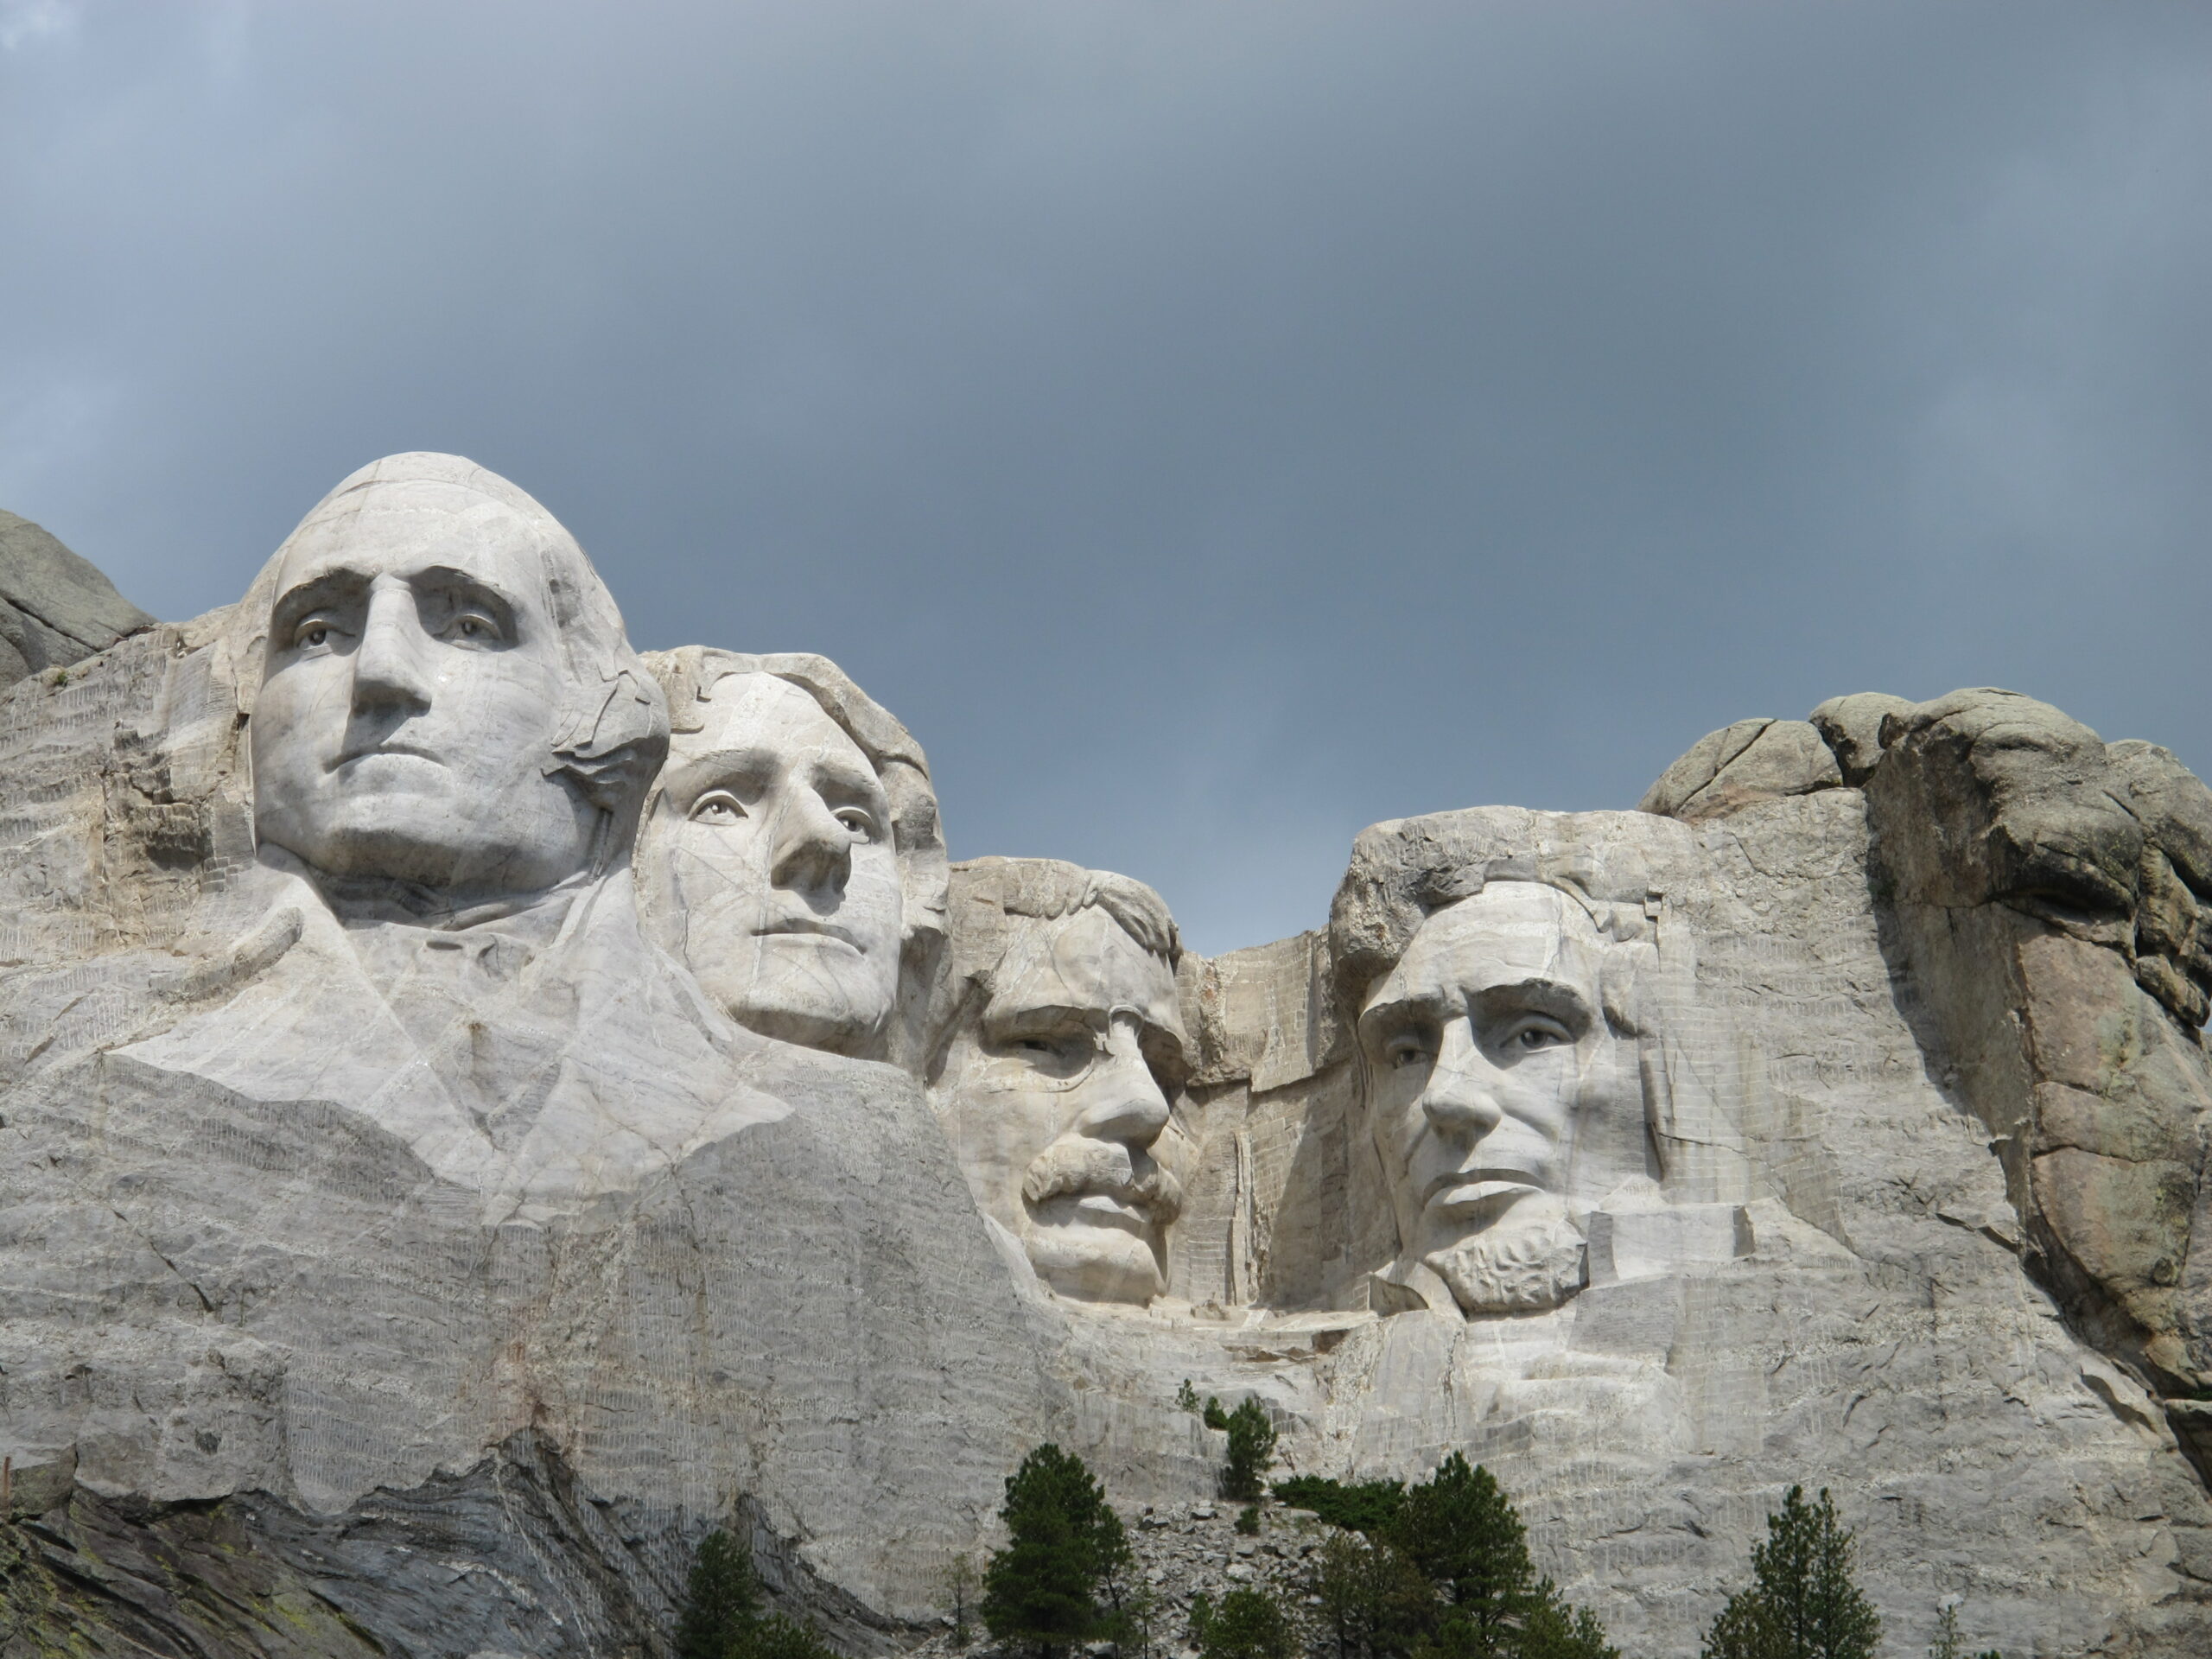 Study Finds Fireworks Contaminated Groundwater Near Mount Rushmore